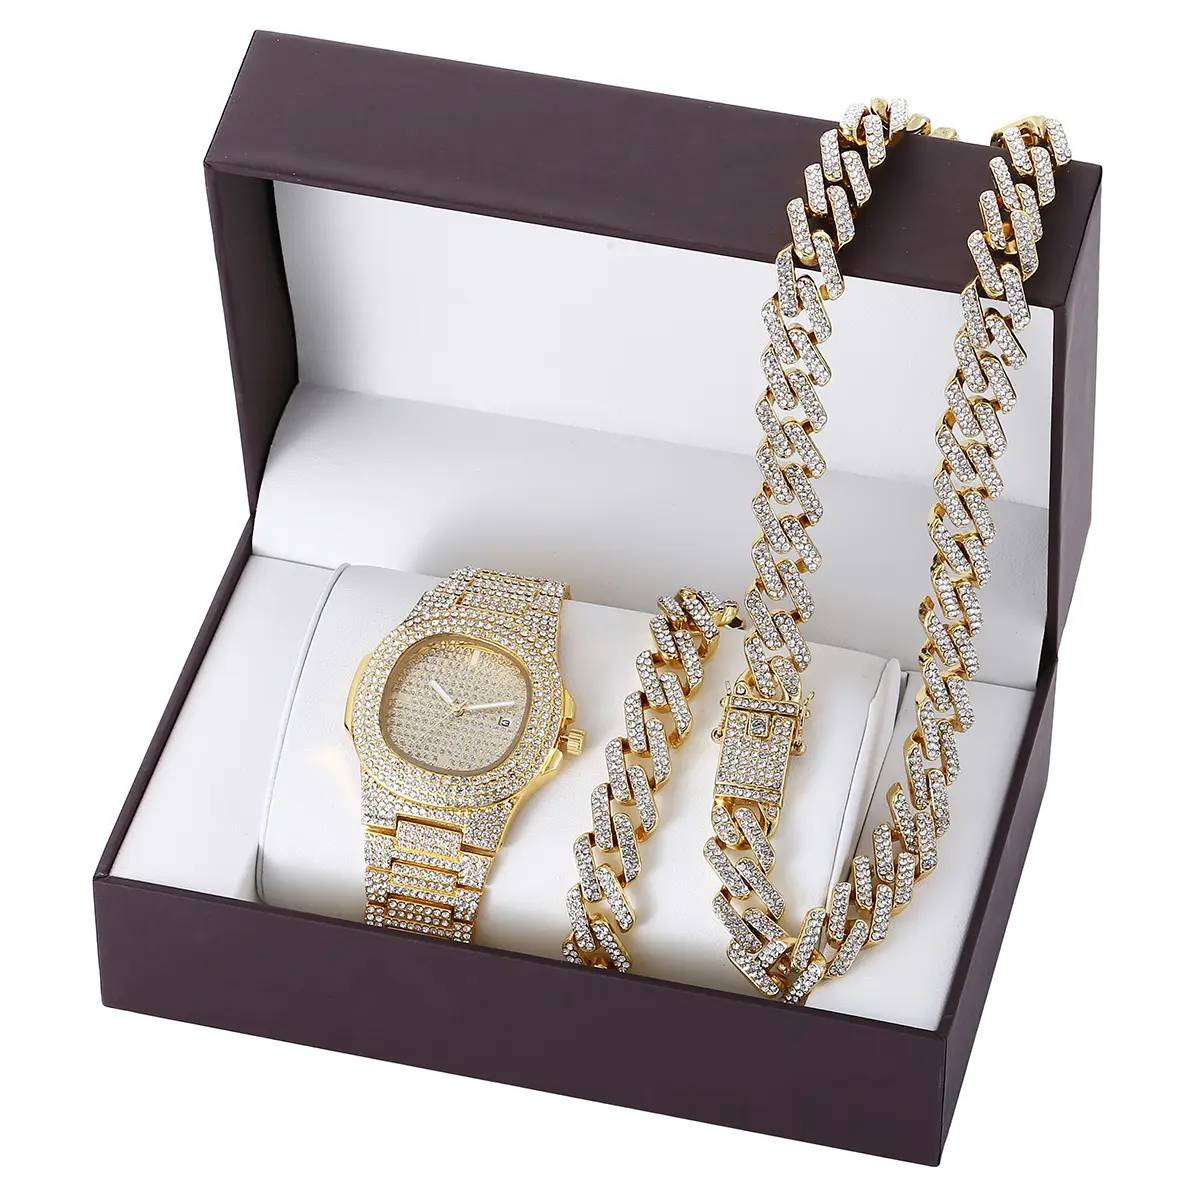 Cuban Chain Watch Set Necklace Watch Bracelet Hop Gold Iced Out Paved Rhinestones CZ Bling Rapper For Men Jewelry